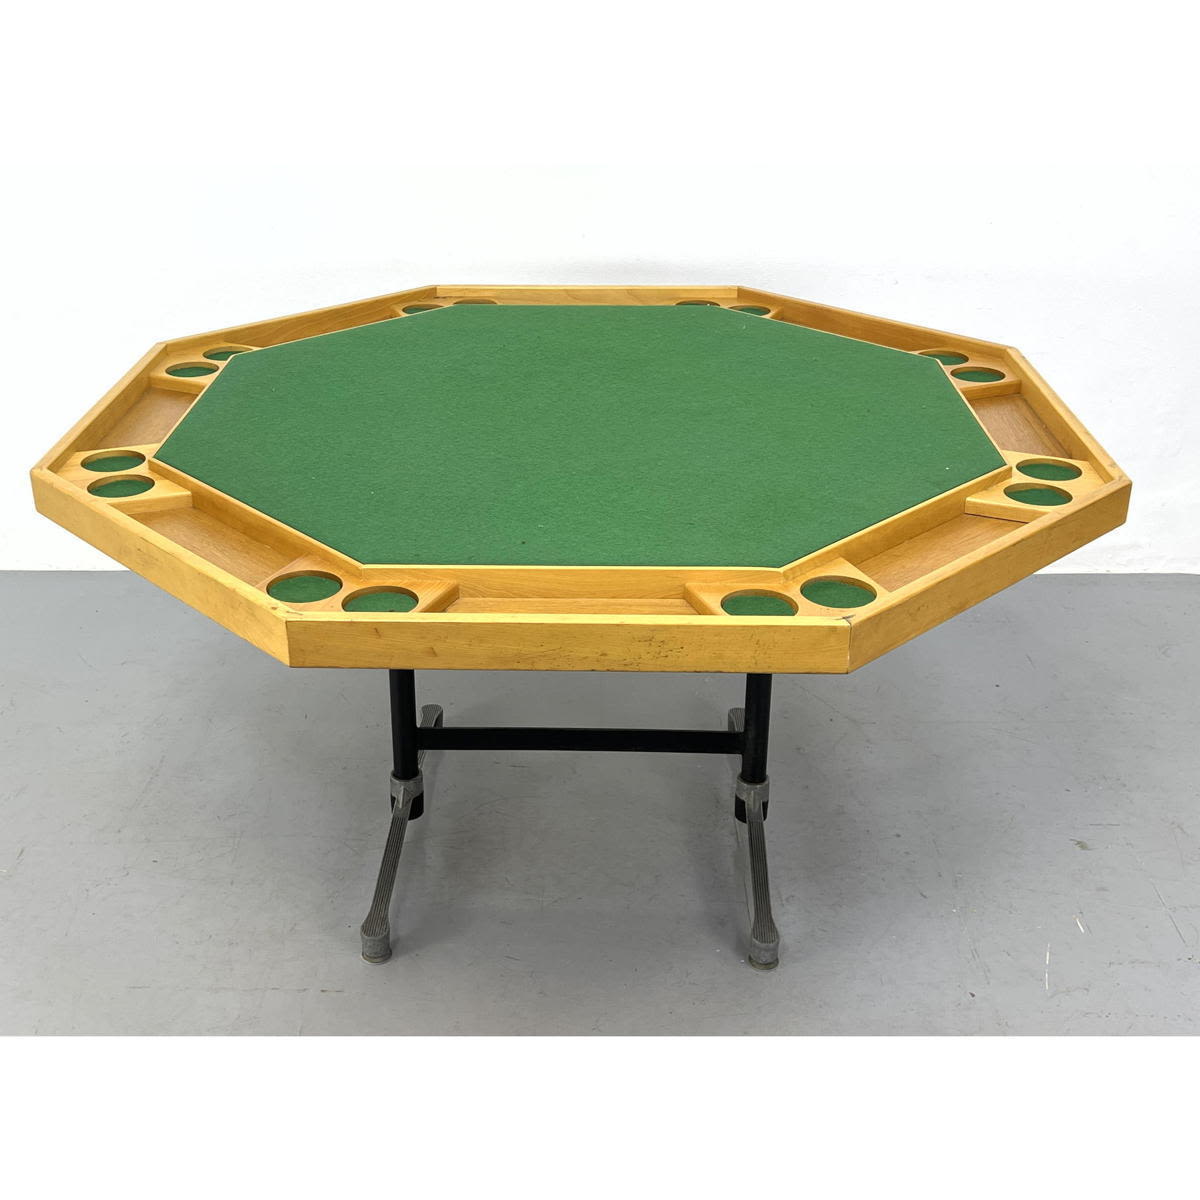 Octagonal Game Table. Blond Wood